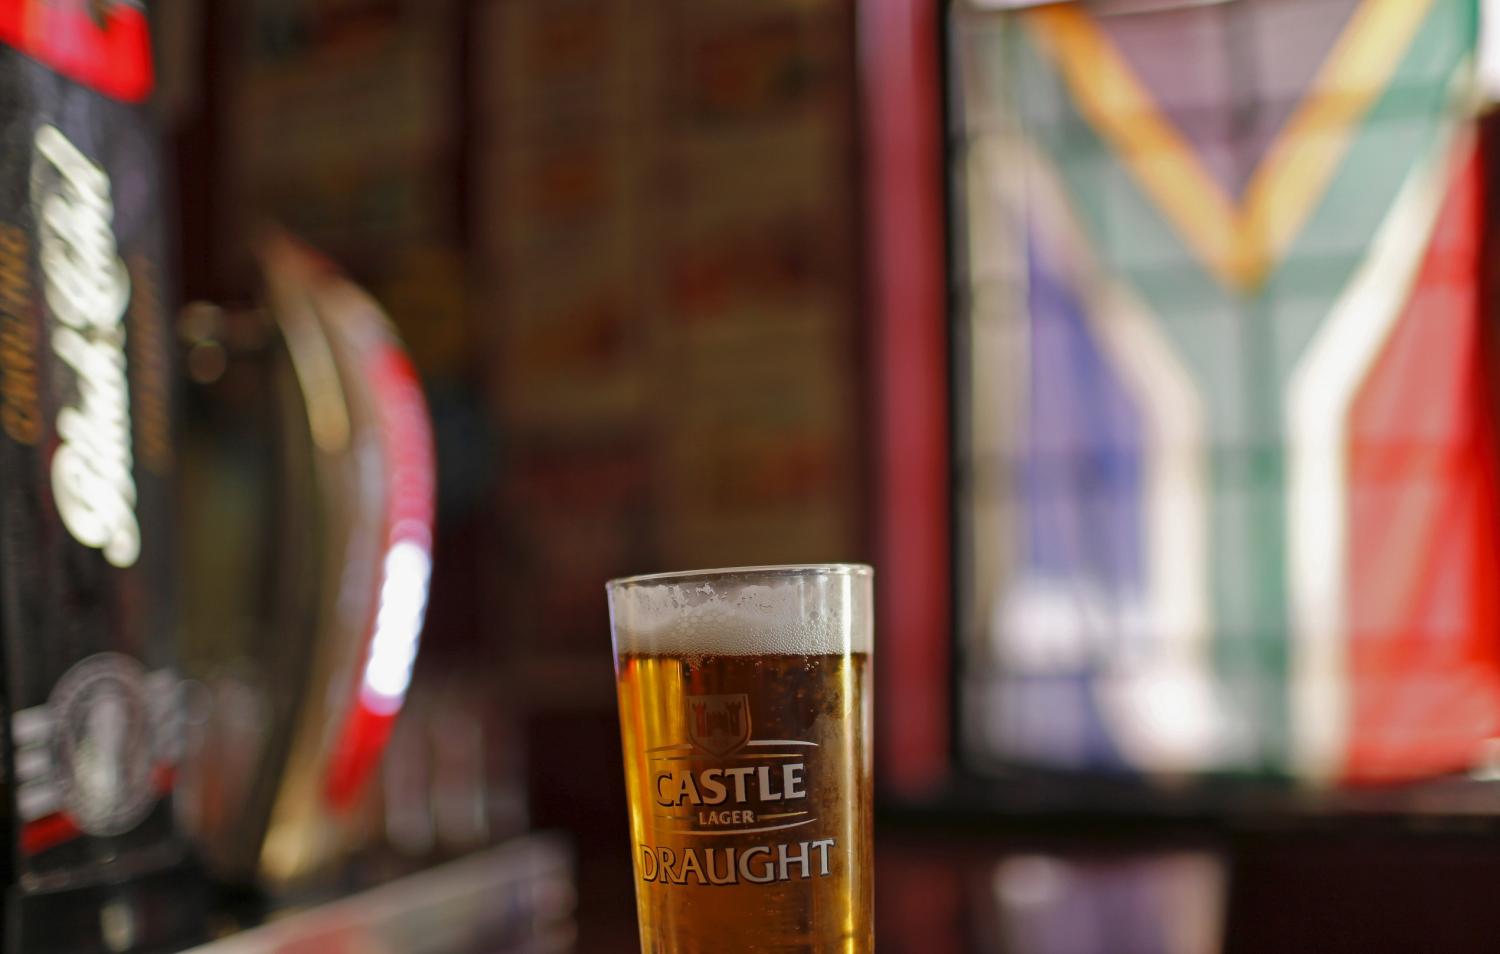 A glass of SABMiller's flagship brew, Castle Lager is seen at a bar in Cape Town, South Africa November 10, 2015. SABMiller Plc last week extended the deadline for rival Anheuser-Busch InBev to make a formal $100 billion-plus takeover offer to 5 p.m. on Wednesday, November 11, in order to finalise shareholder support for the deal. REUTERS/Mike Hutchings      TPX IMAGES OF THE DAY        - GF20000053400